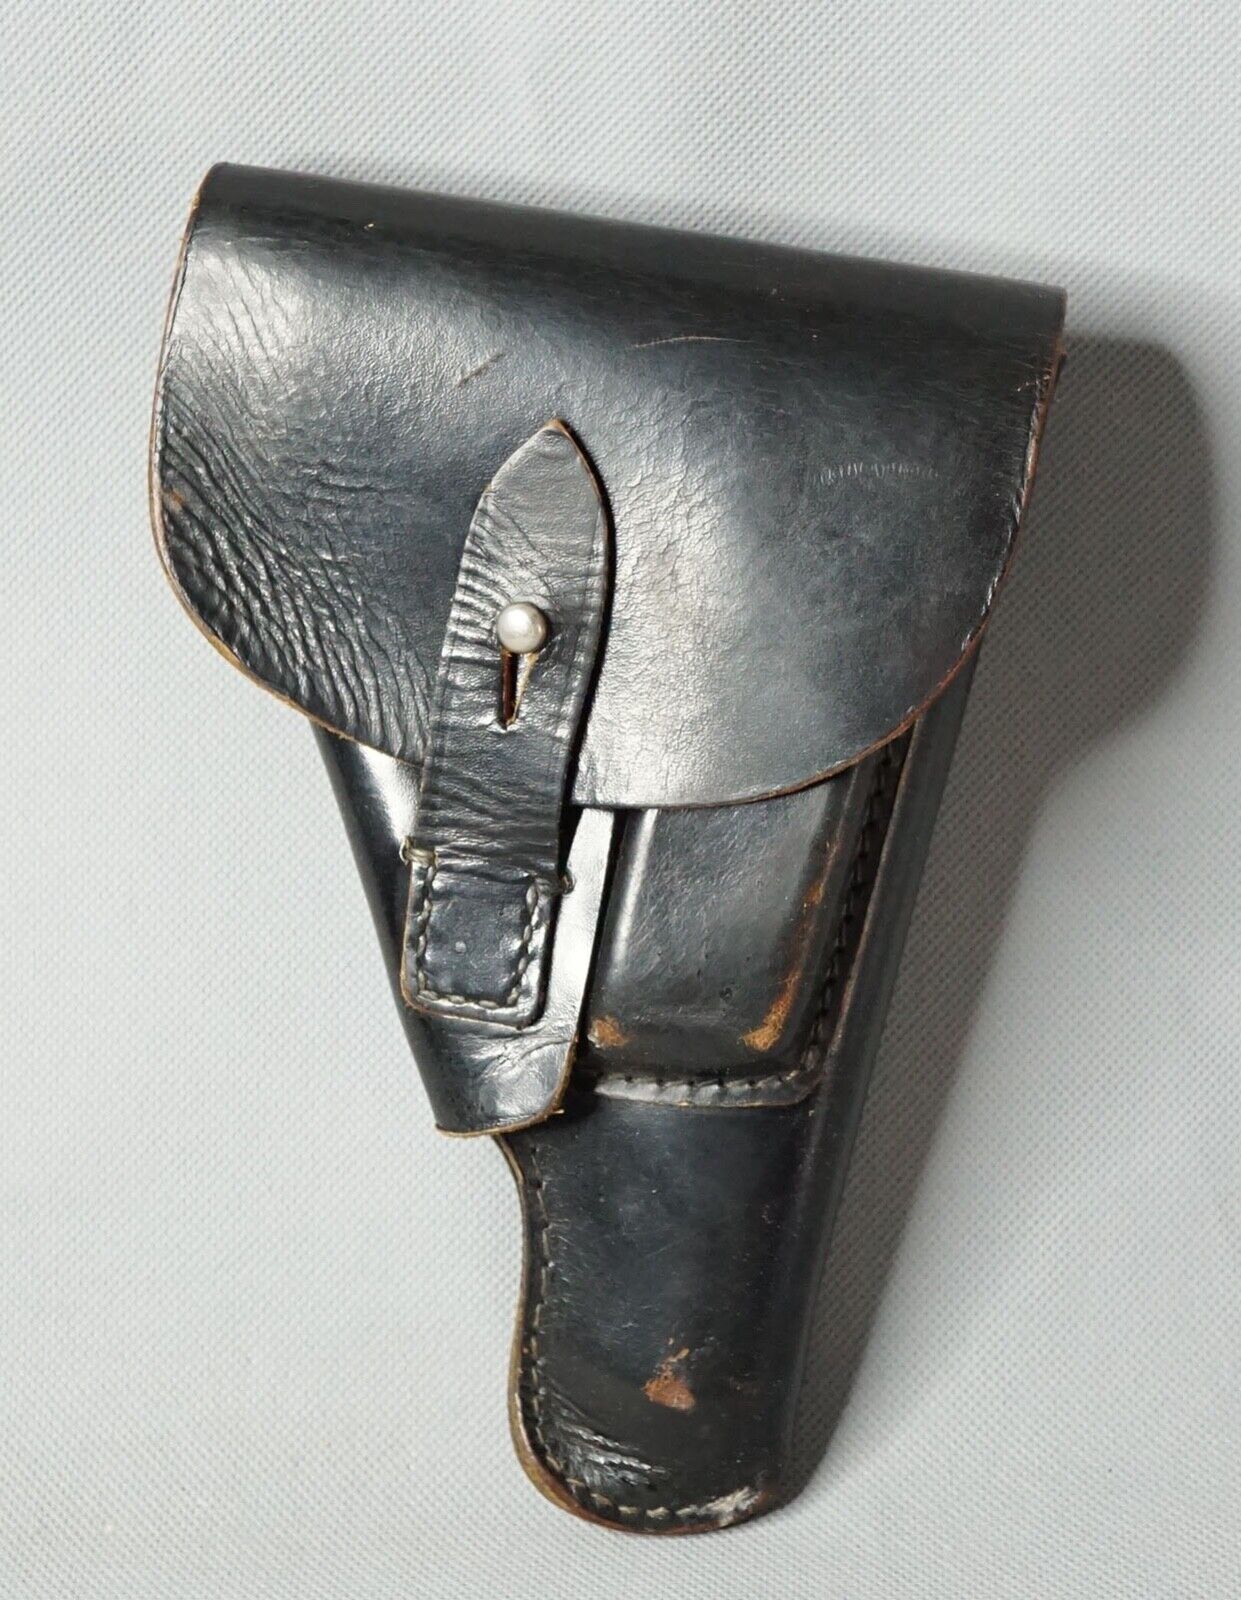 1943 WWII German Officer's Walther PP  Black Leather Pistol Holster Marked